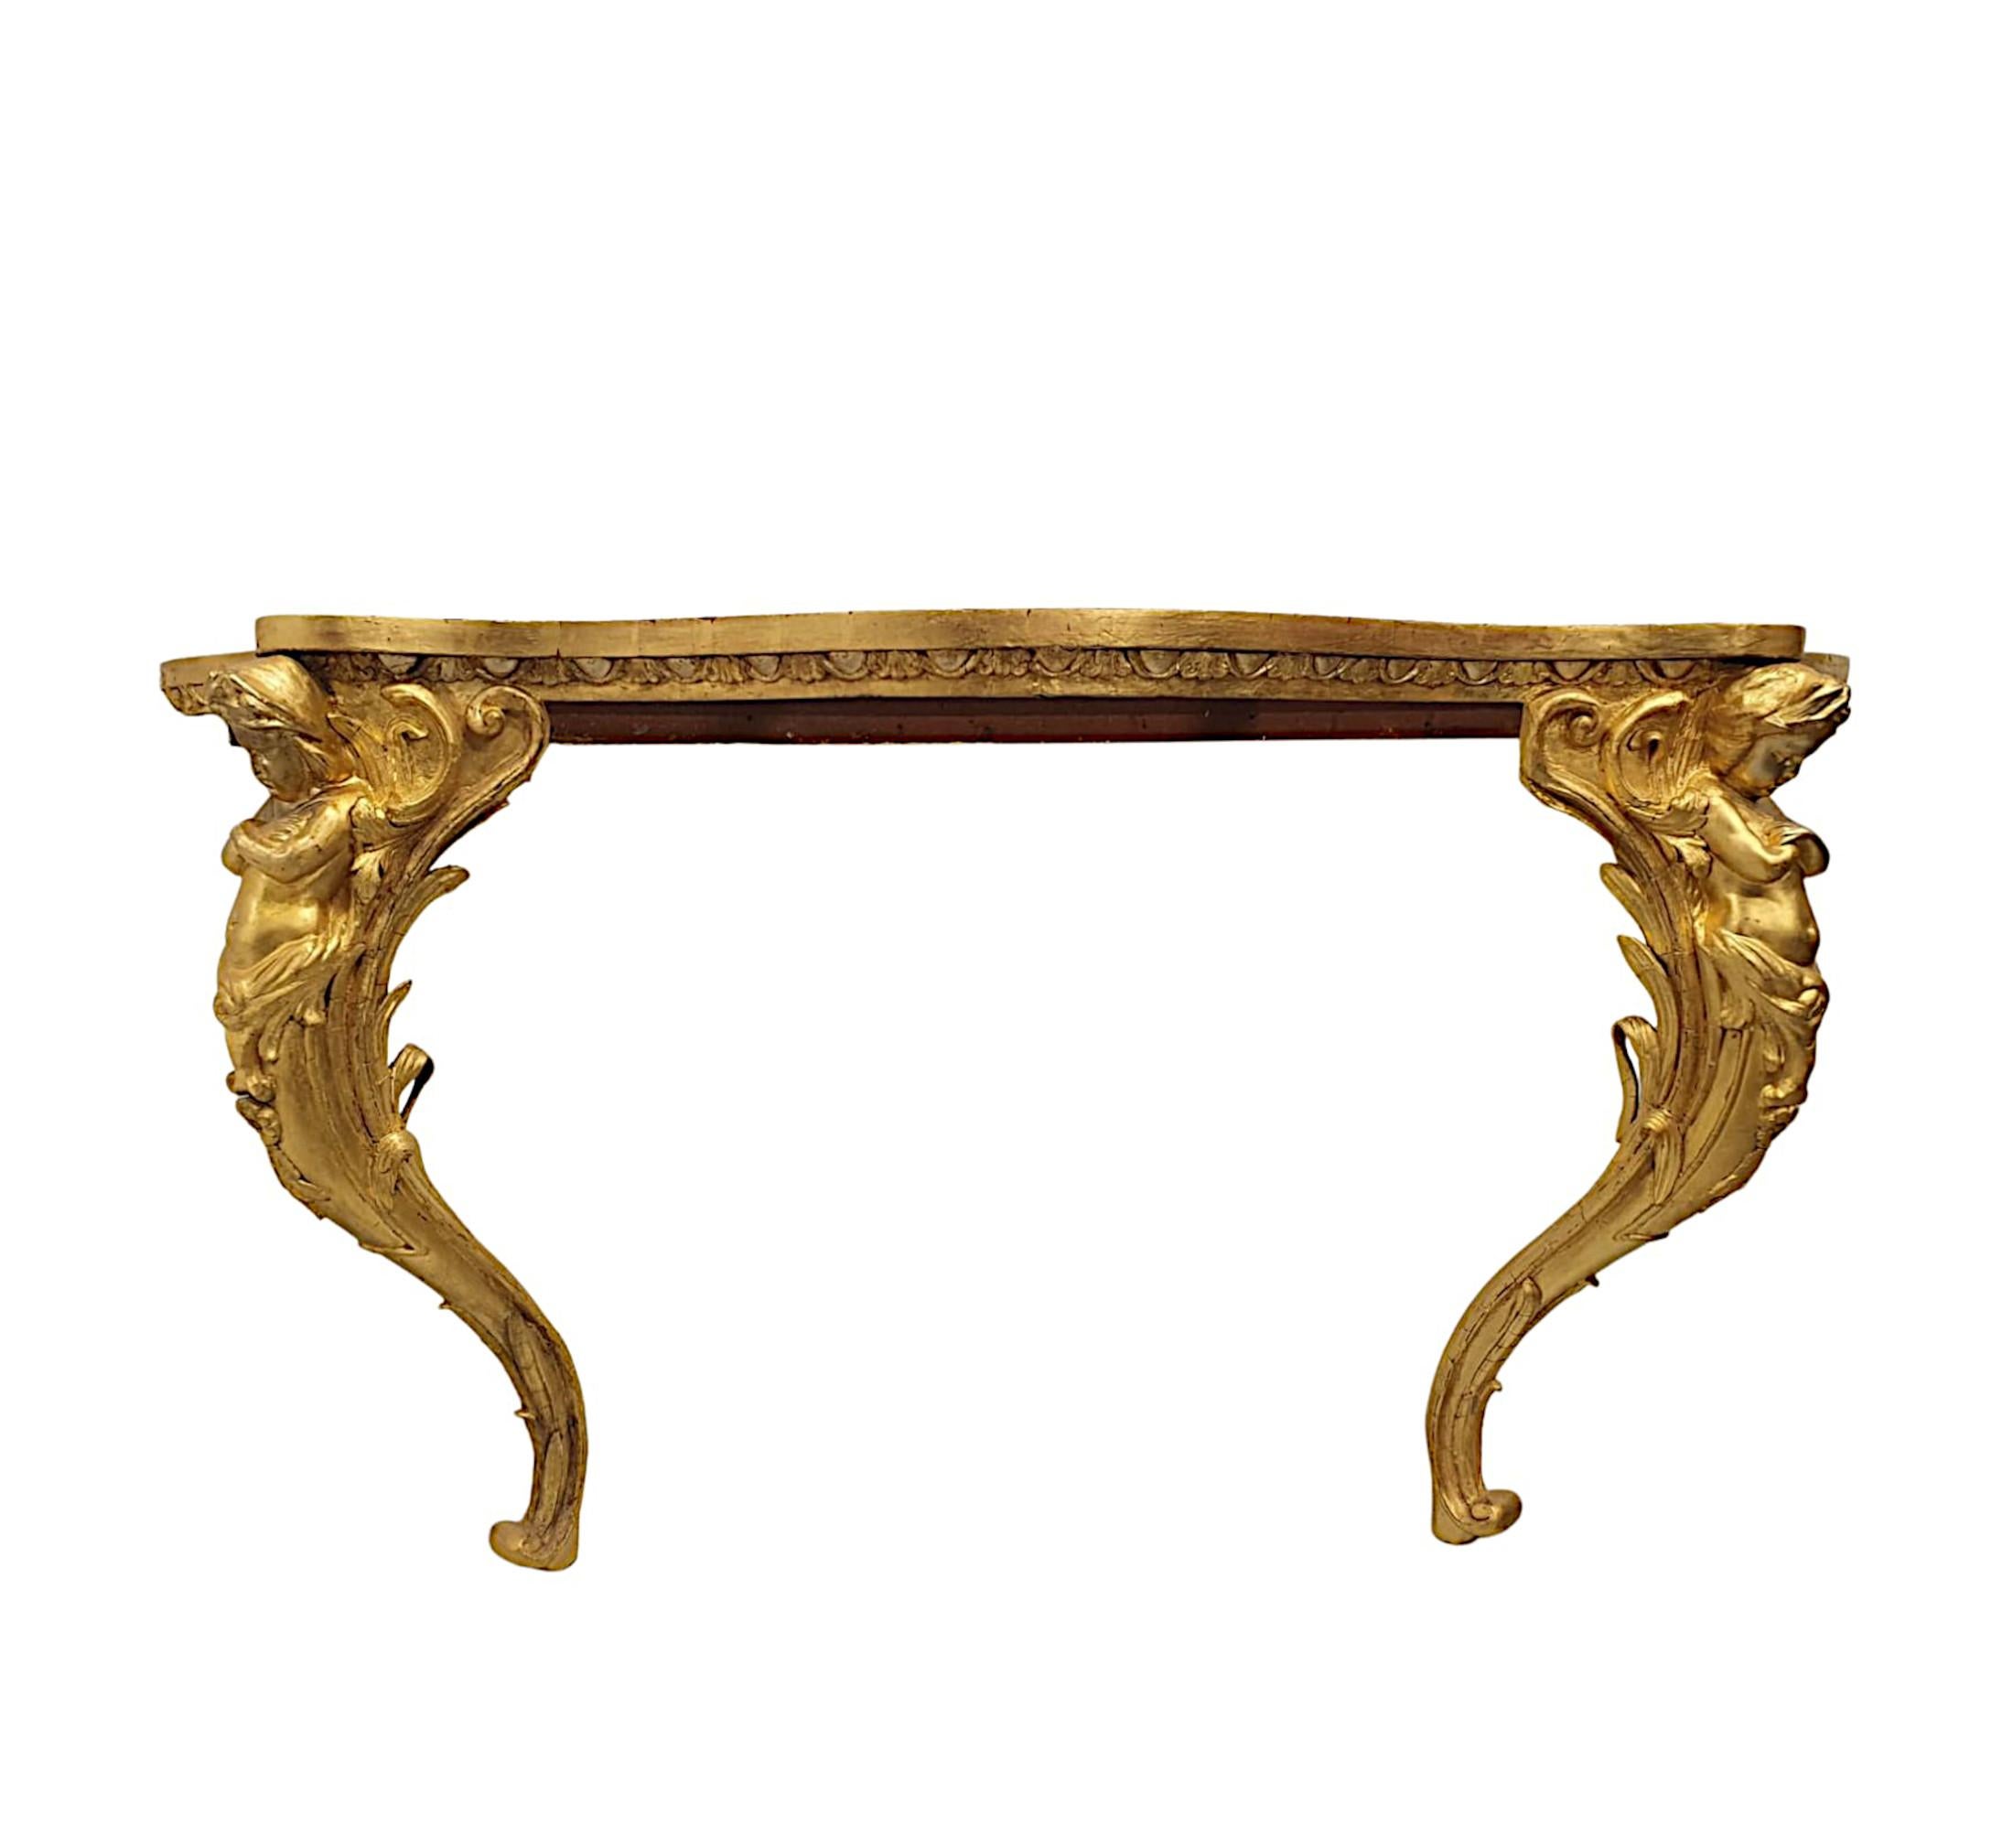  A Very Fine and Rare 19th Century marble Top Giltwood Console Table  For Sale 1